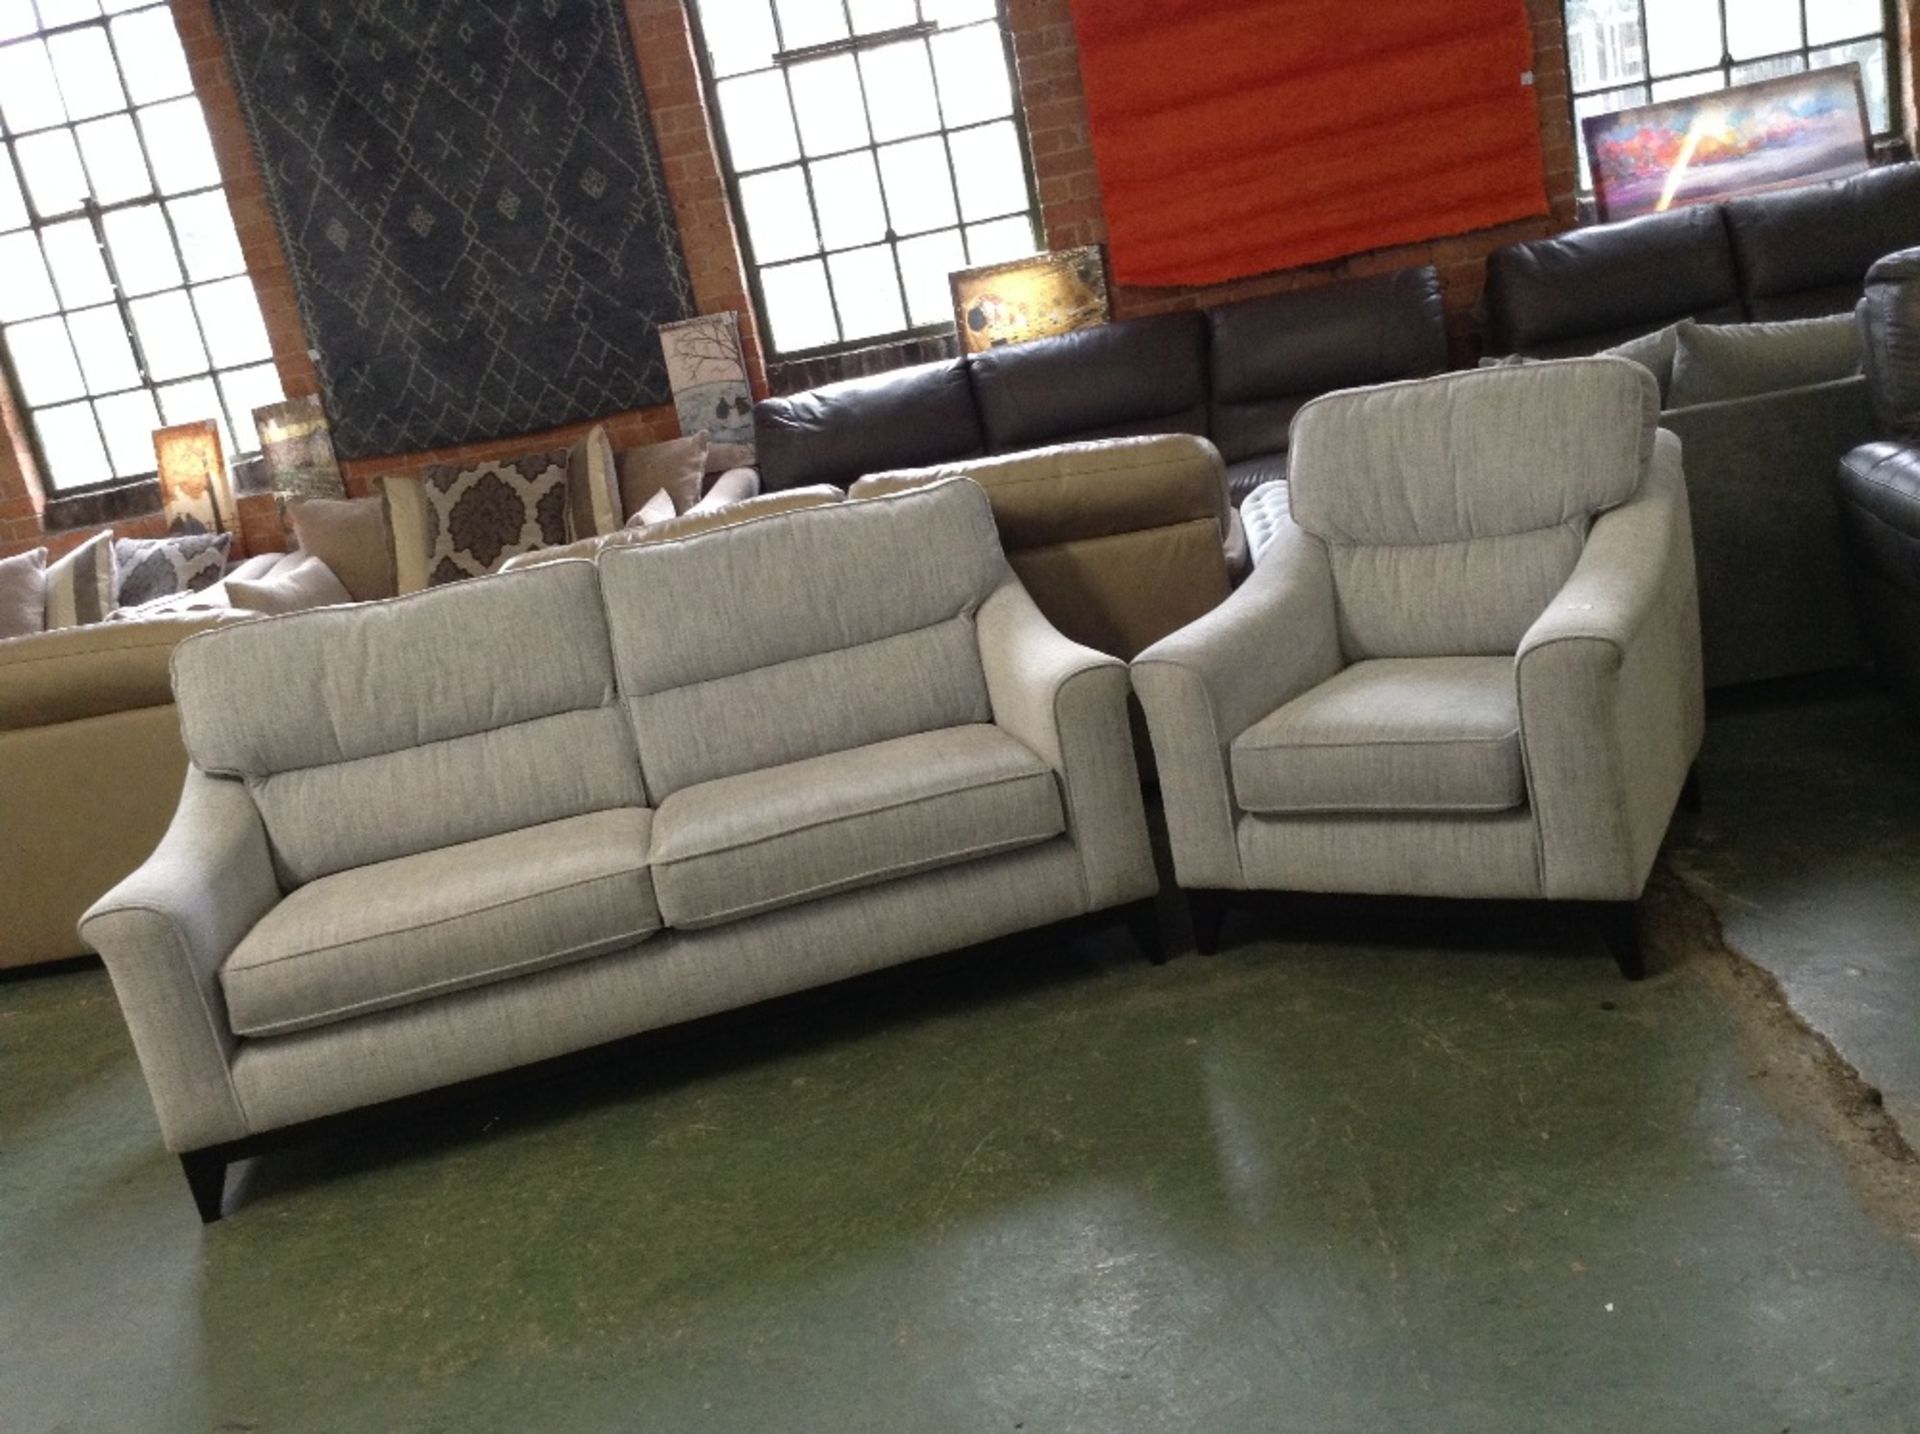 DUCK EGG BLUE 3 SEATER SOFA AND CHAIR